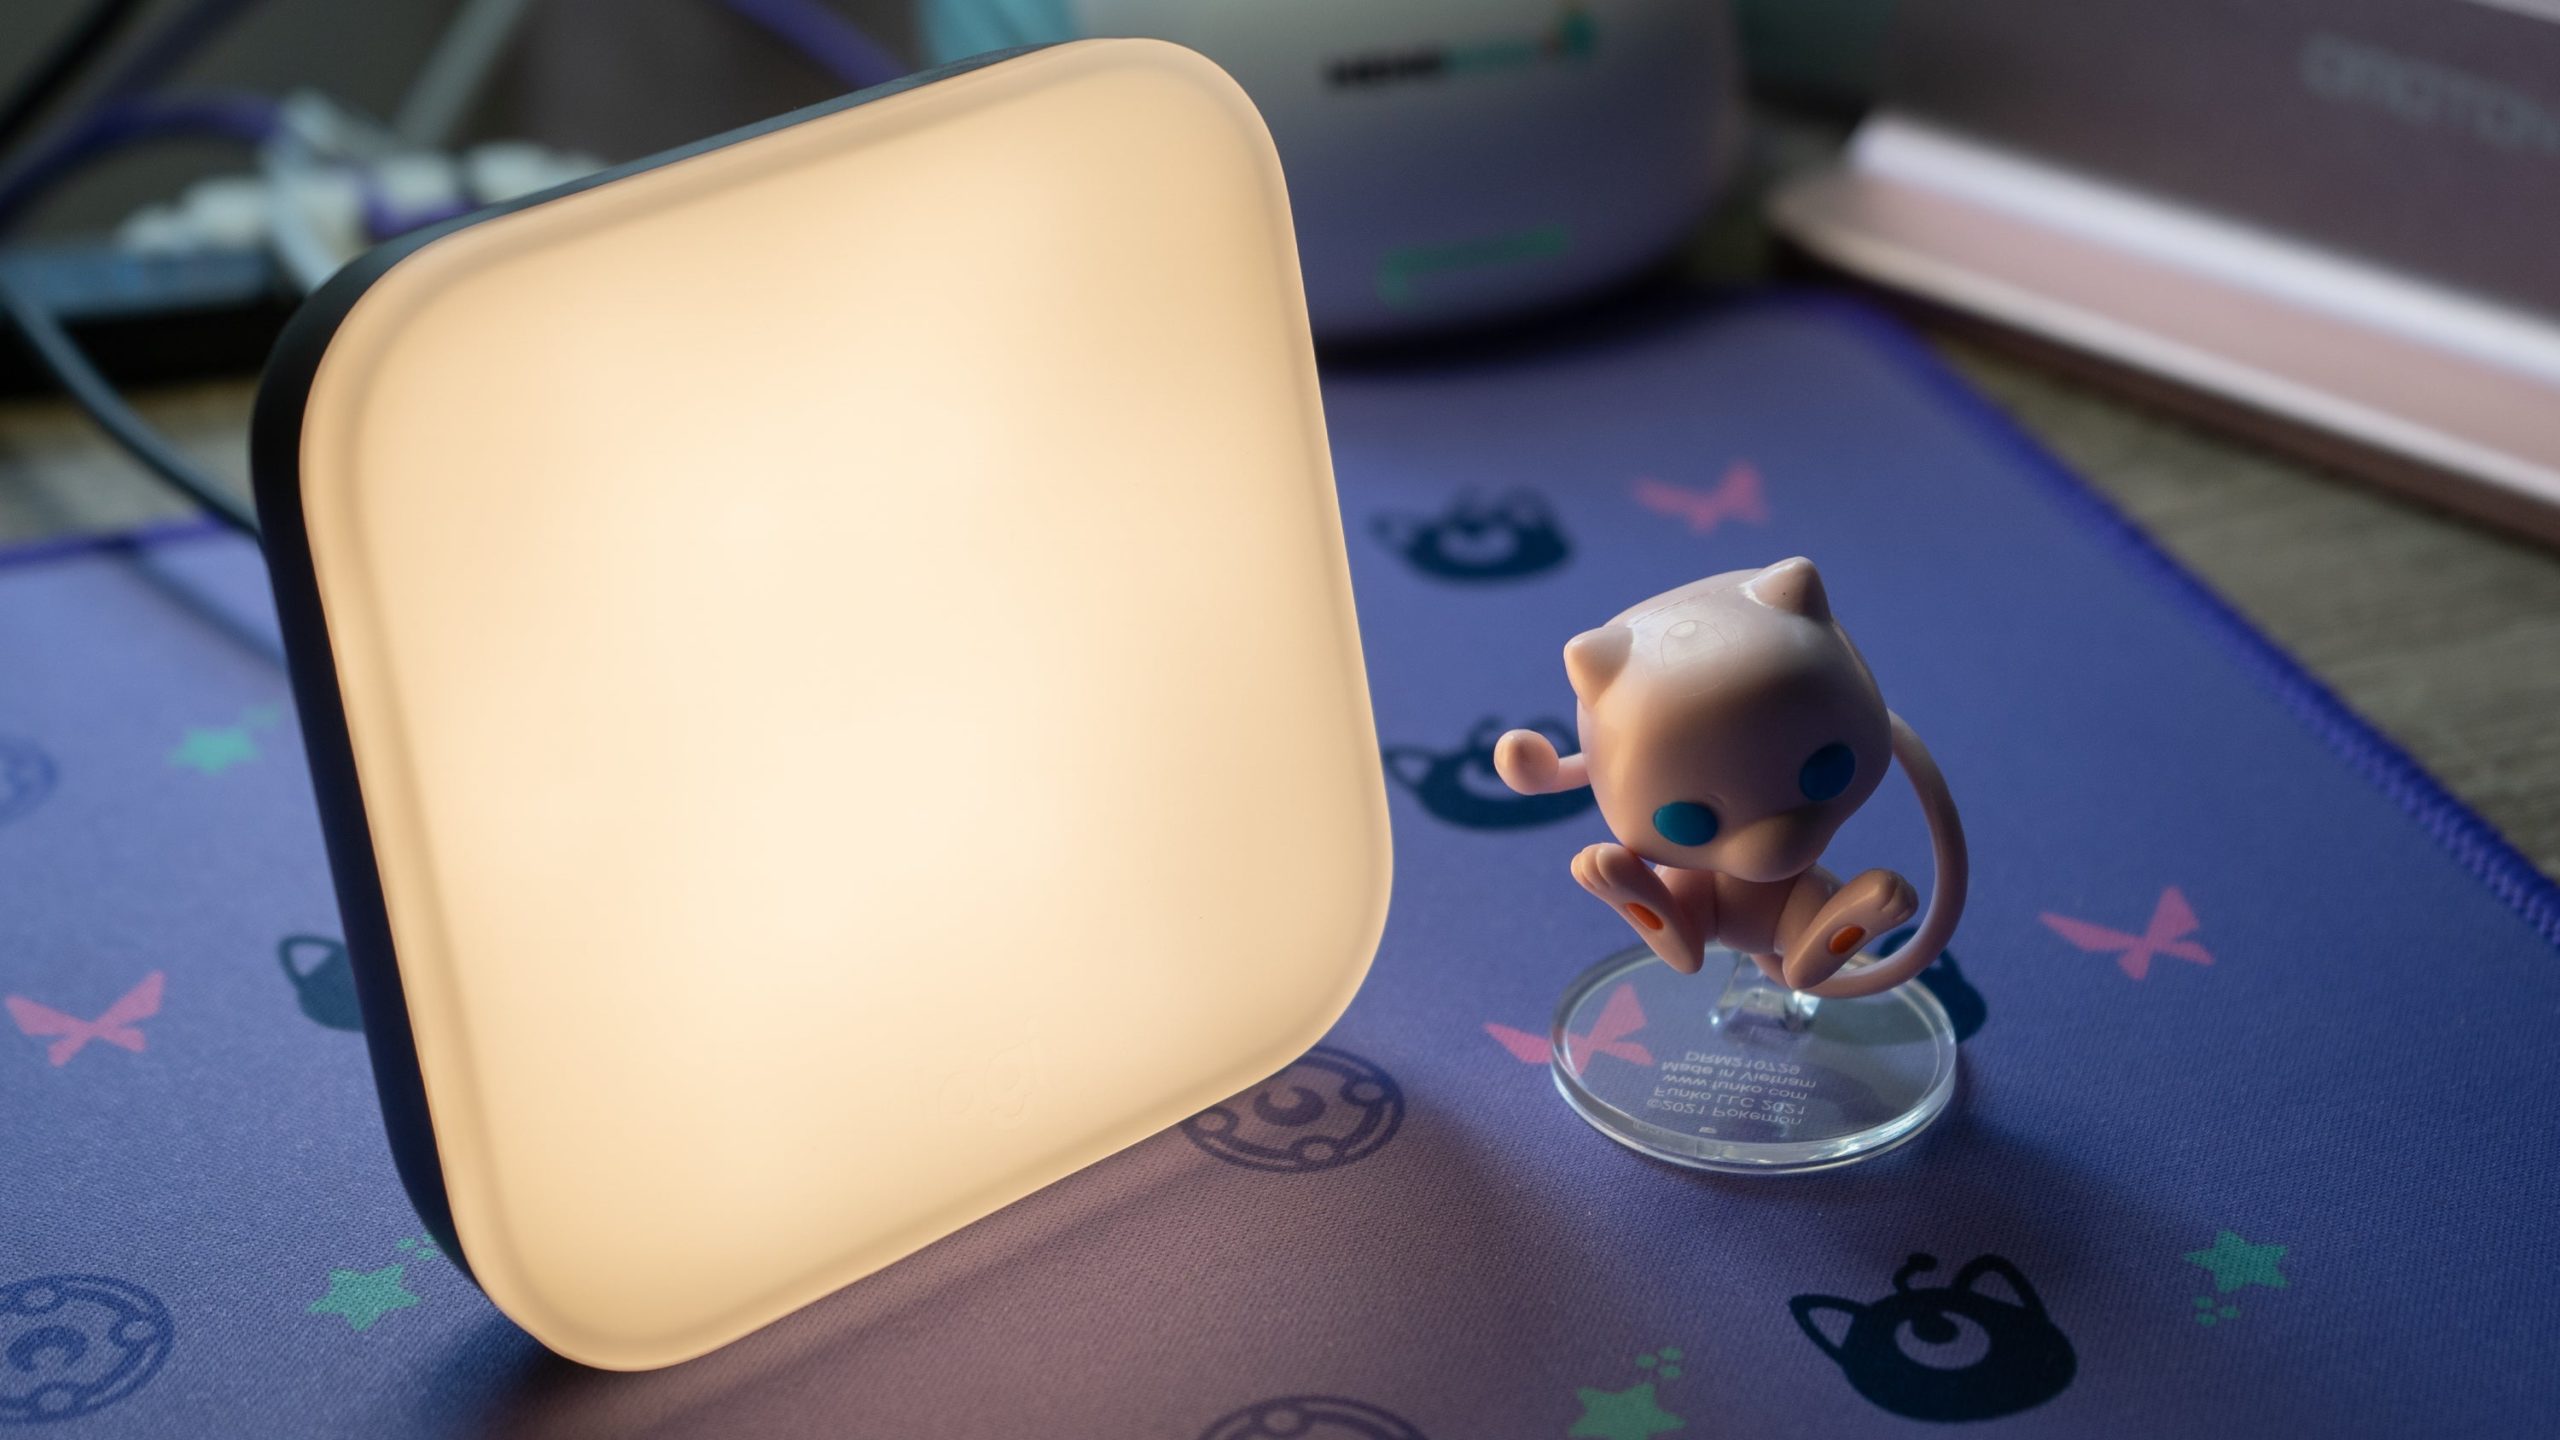 Light up your Mew with a faint glow, if you'd prefer not to focus on lighting yourself. (Photo: Florence Ion)